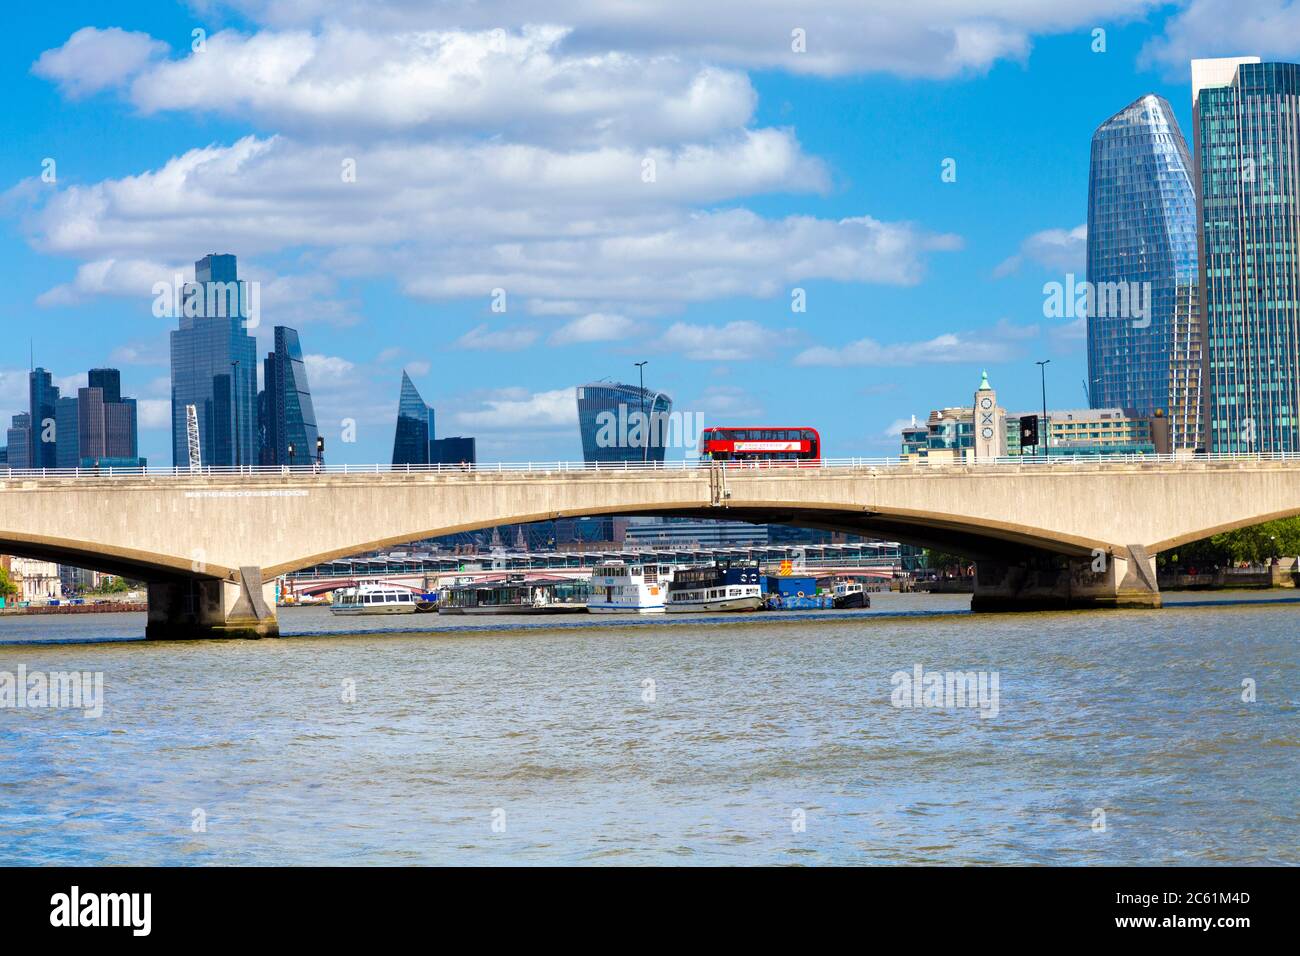 Red double decker bus on the Waterloo Bridge over the Thames river, London, UK Stock Photo